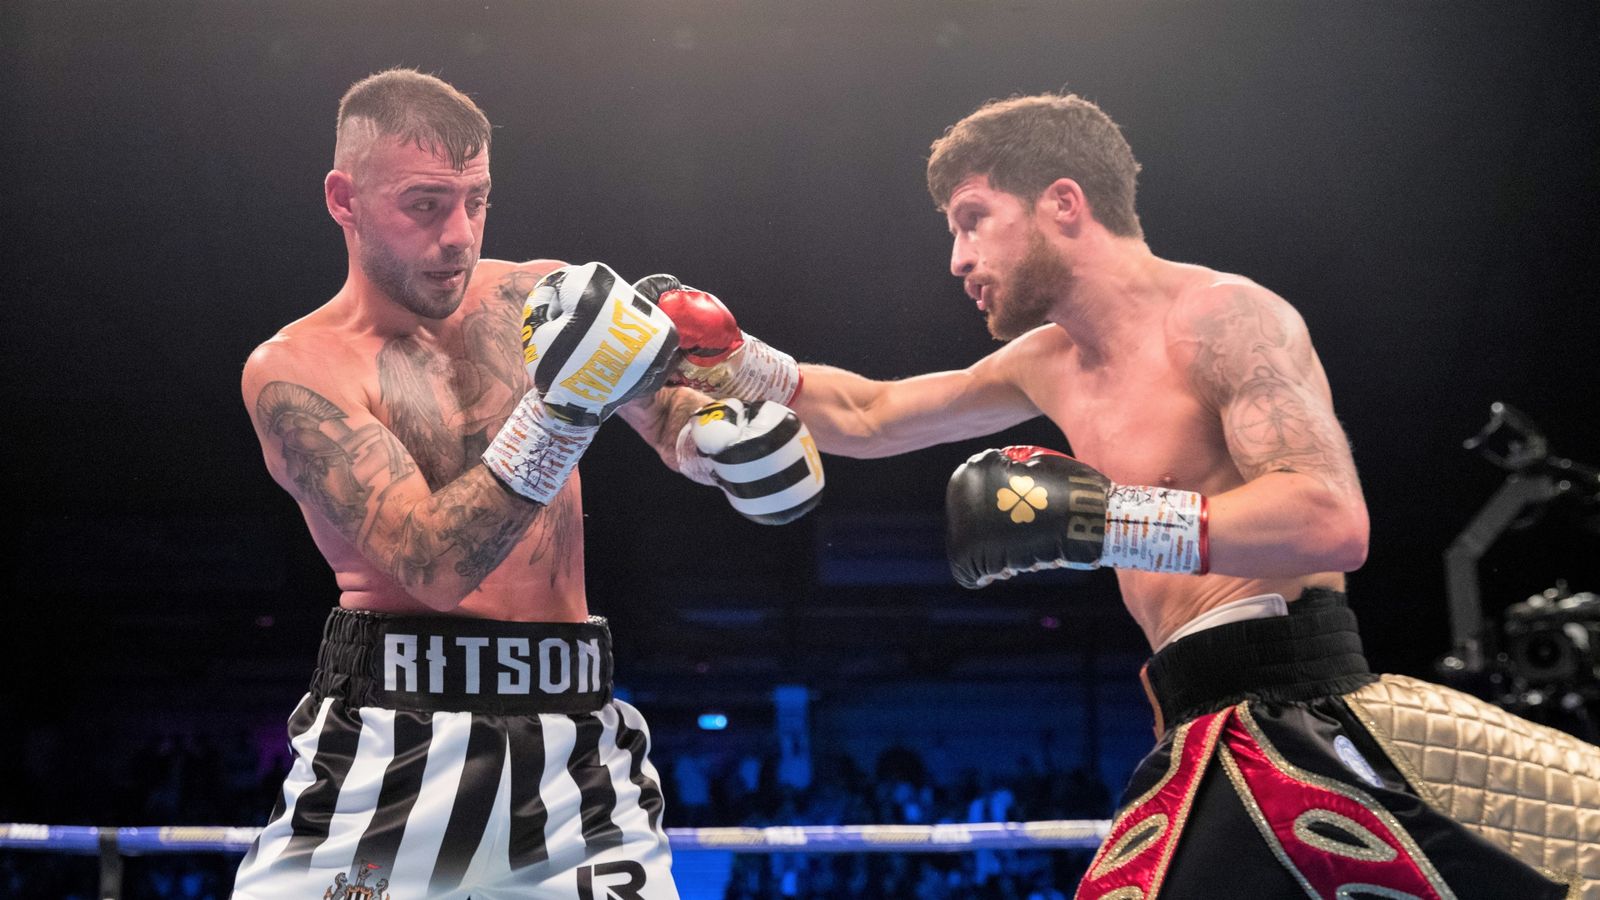 Davies Jr Vs Ritson Lewis Ritson Defeats Robbie Davies Jr On Points After Thrilling Fight In